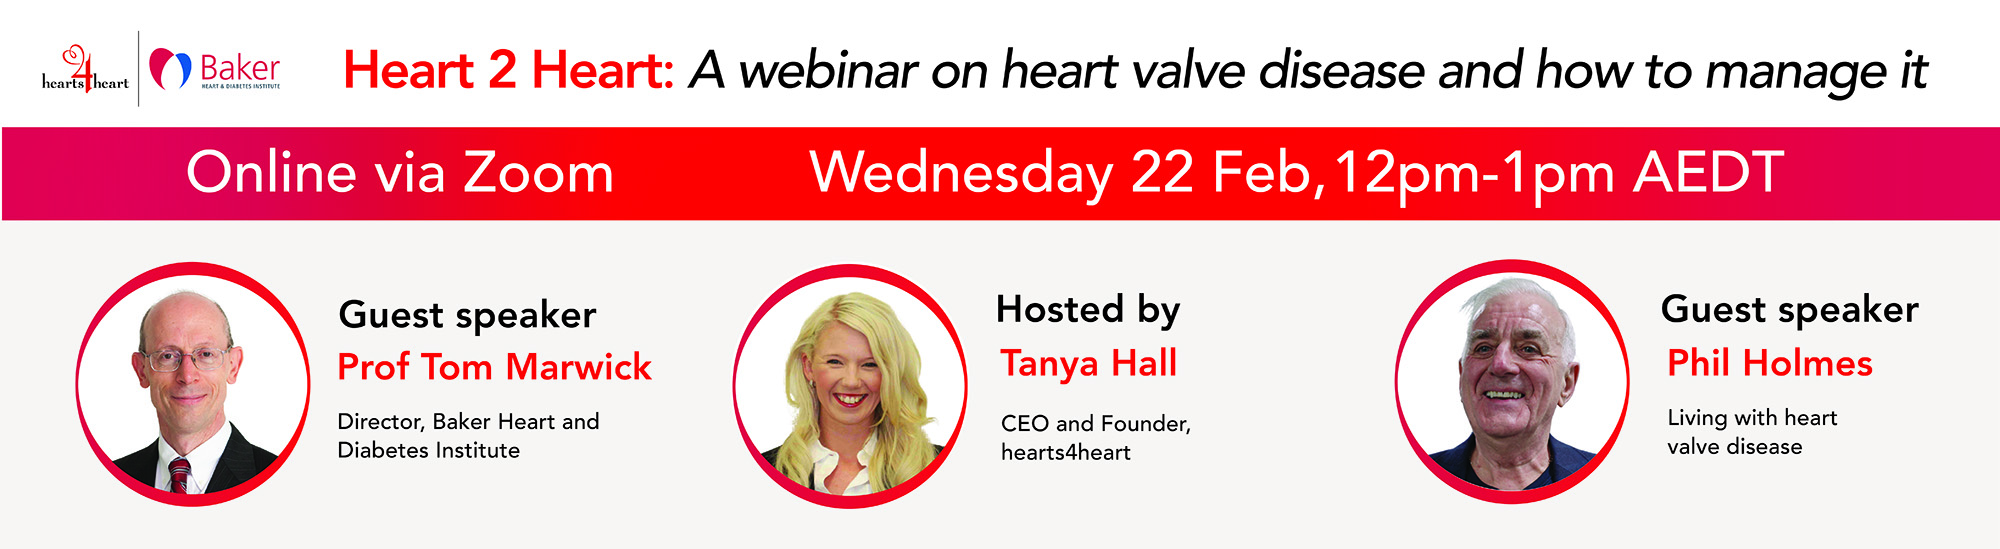 A webinar on heart valve disease and how to manage it